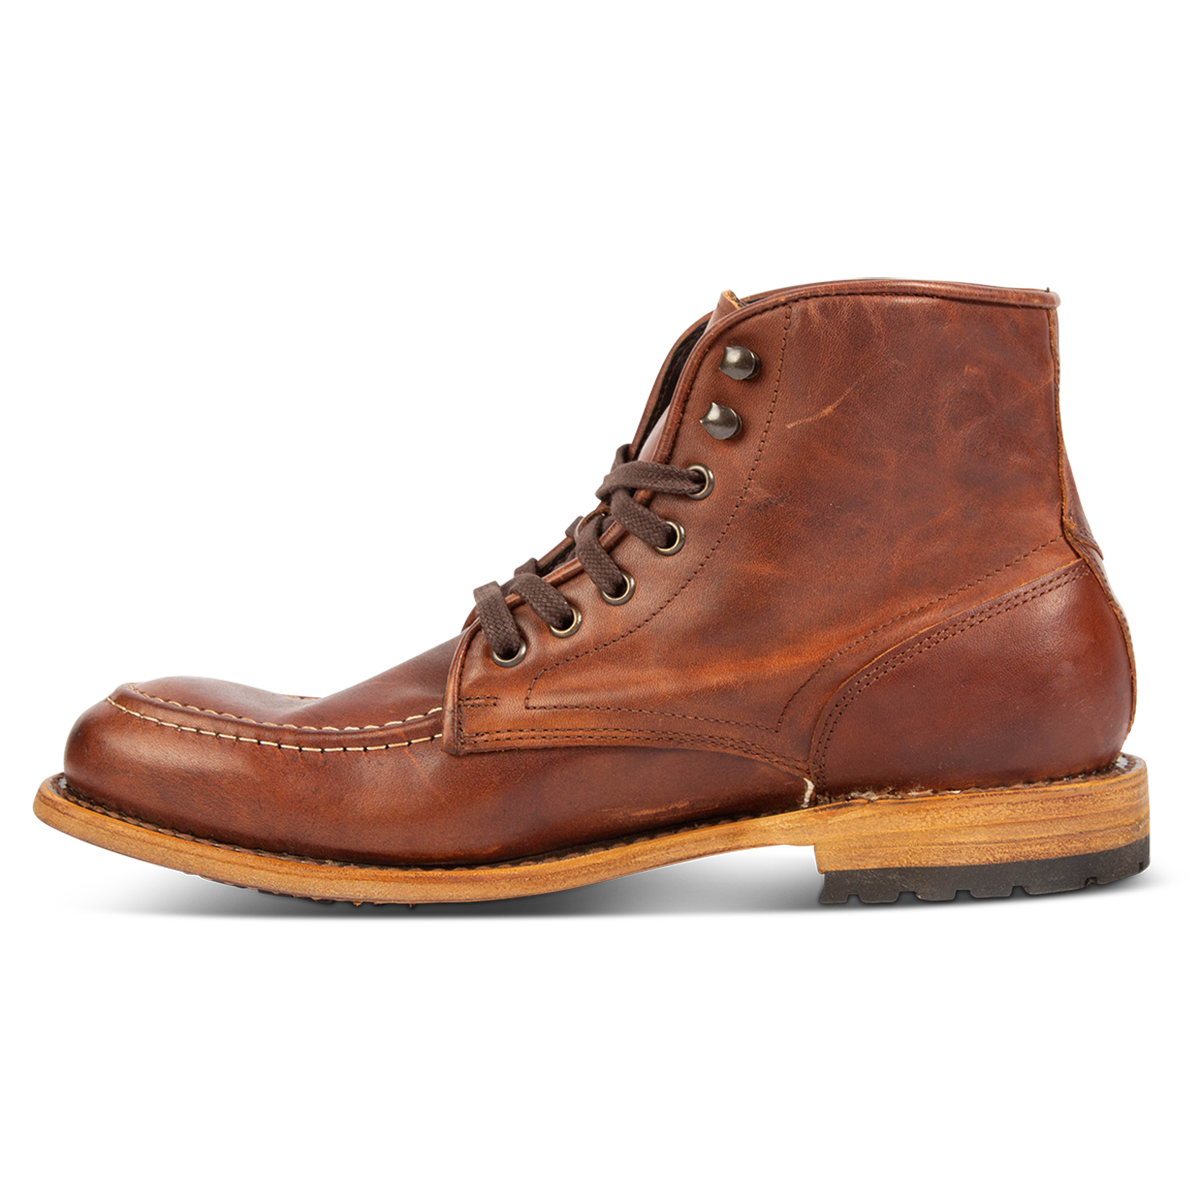 Inside view showing leather body and leather tread sole on FREEBIRD men's Benning cognac boot